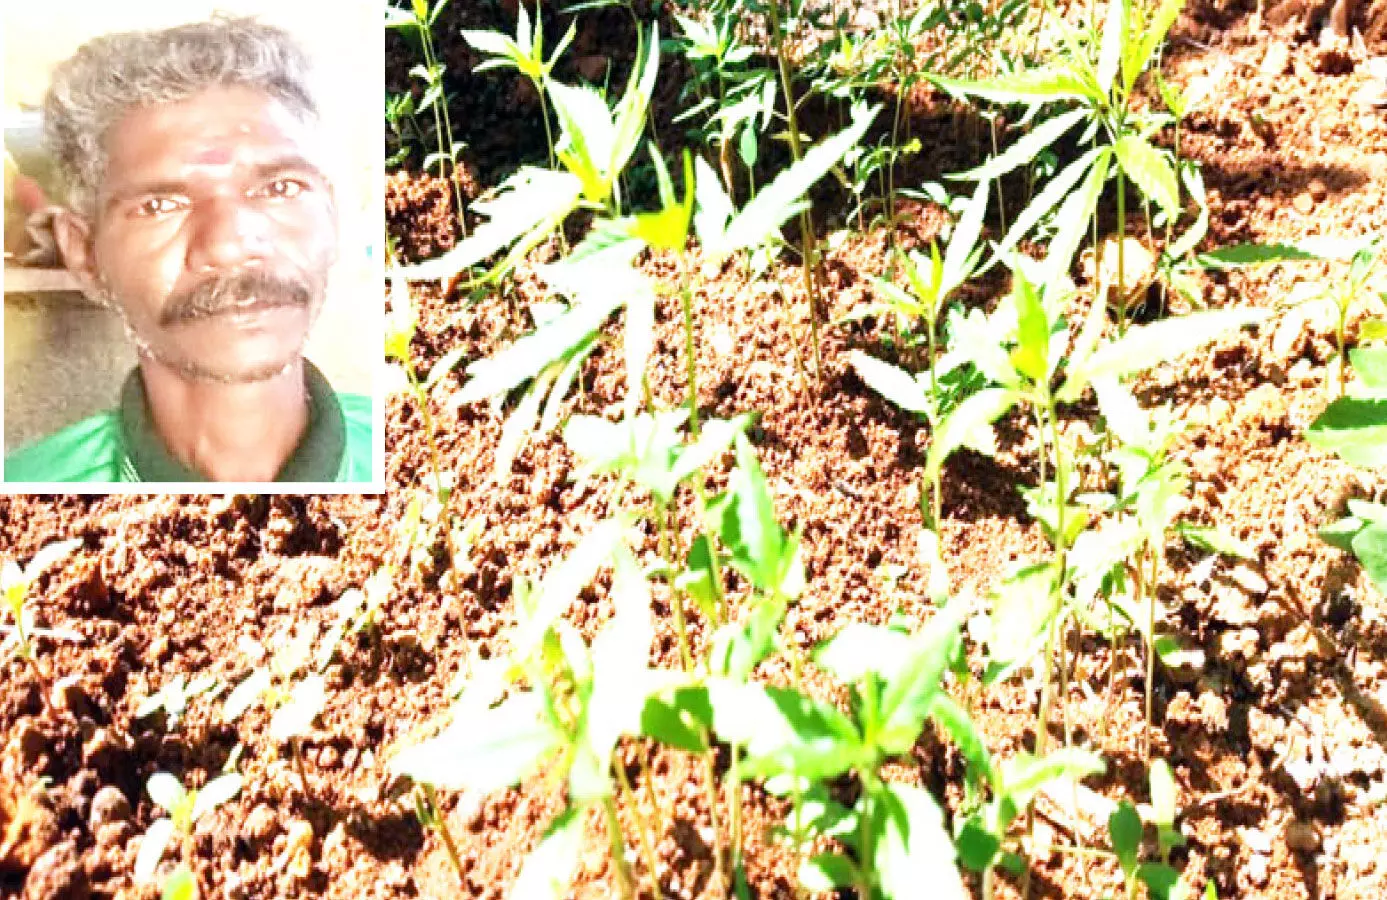 Growing cannabis in the backyard;  Grihanathan arrested